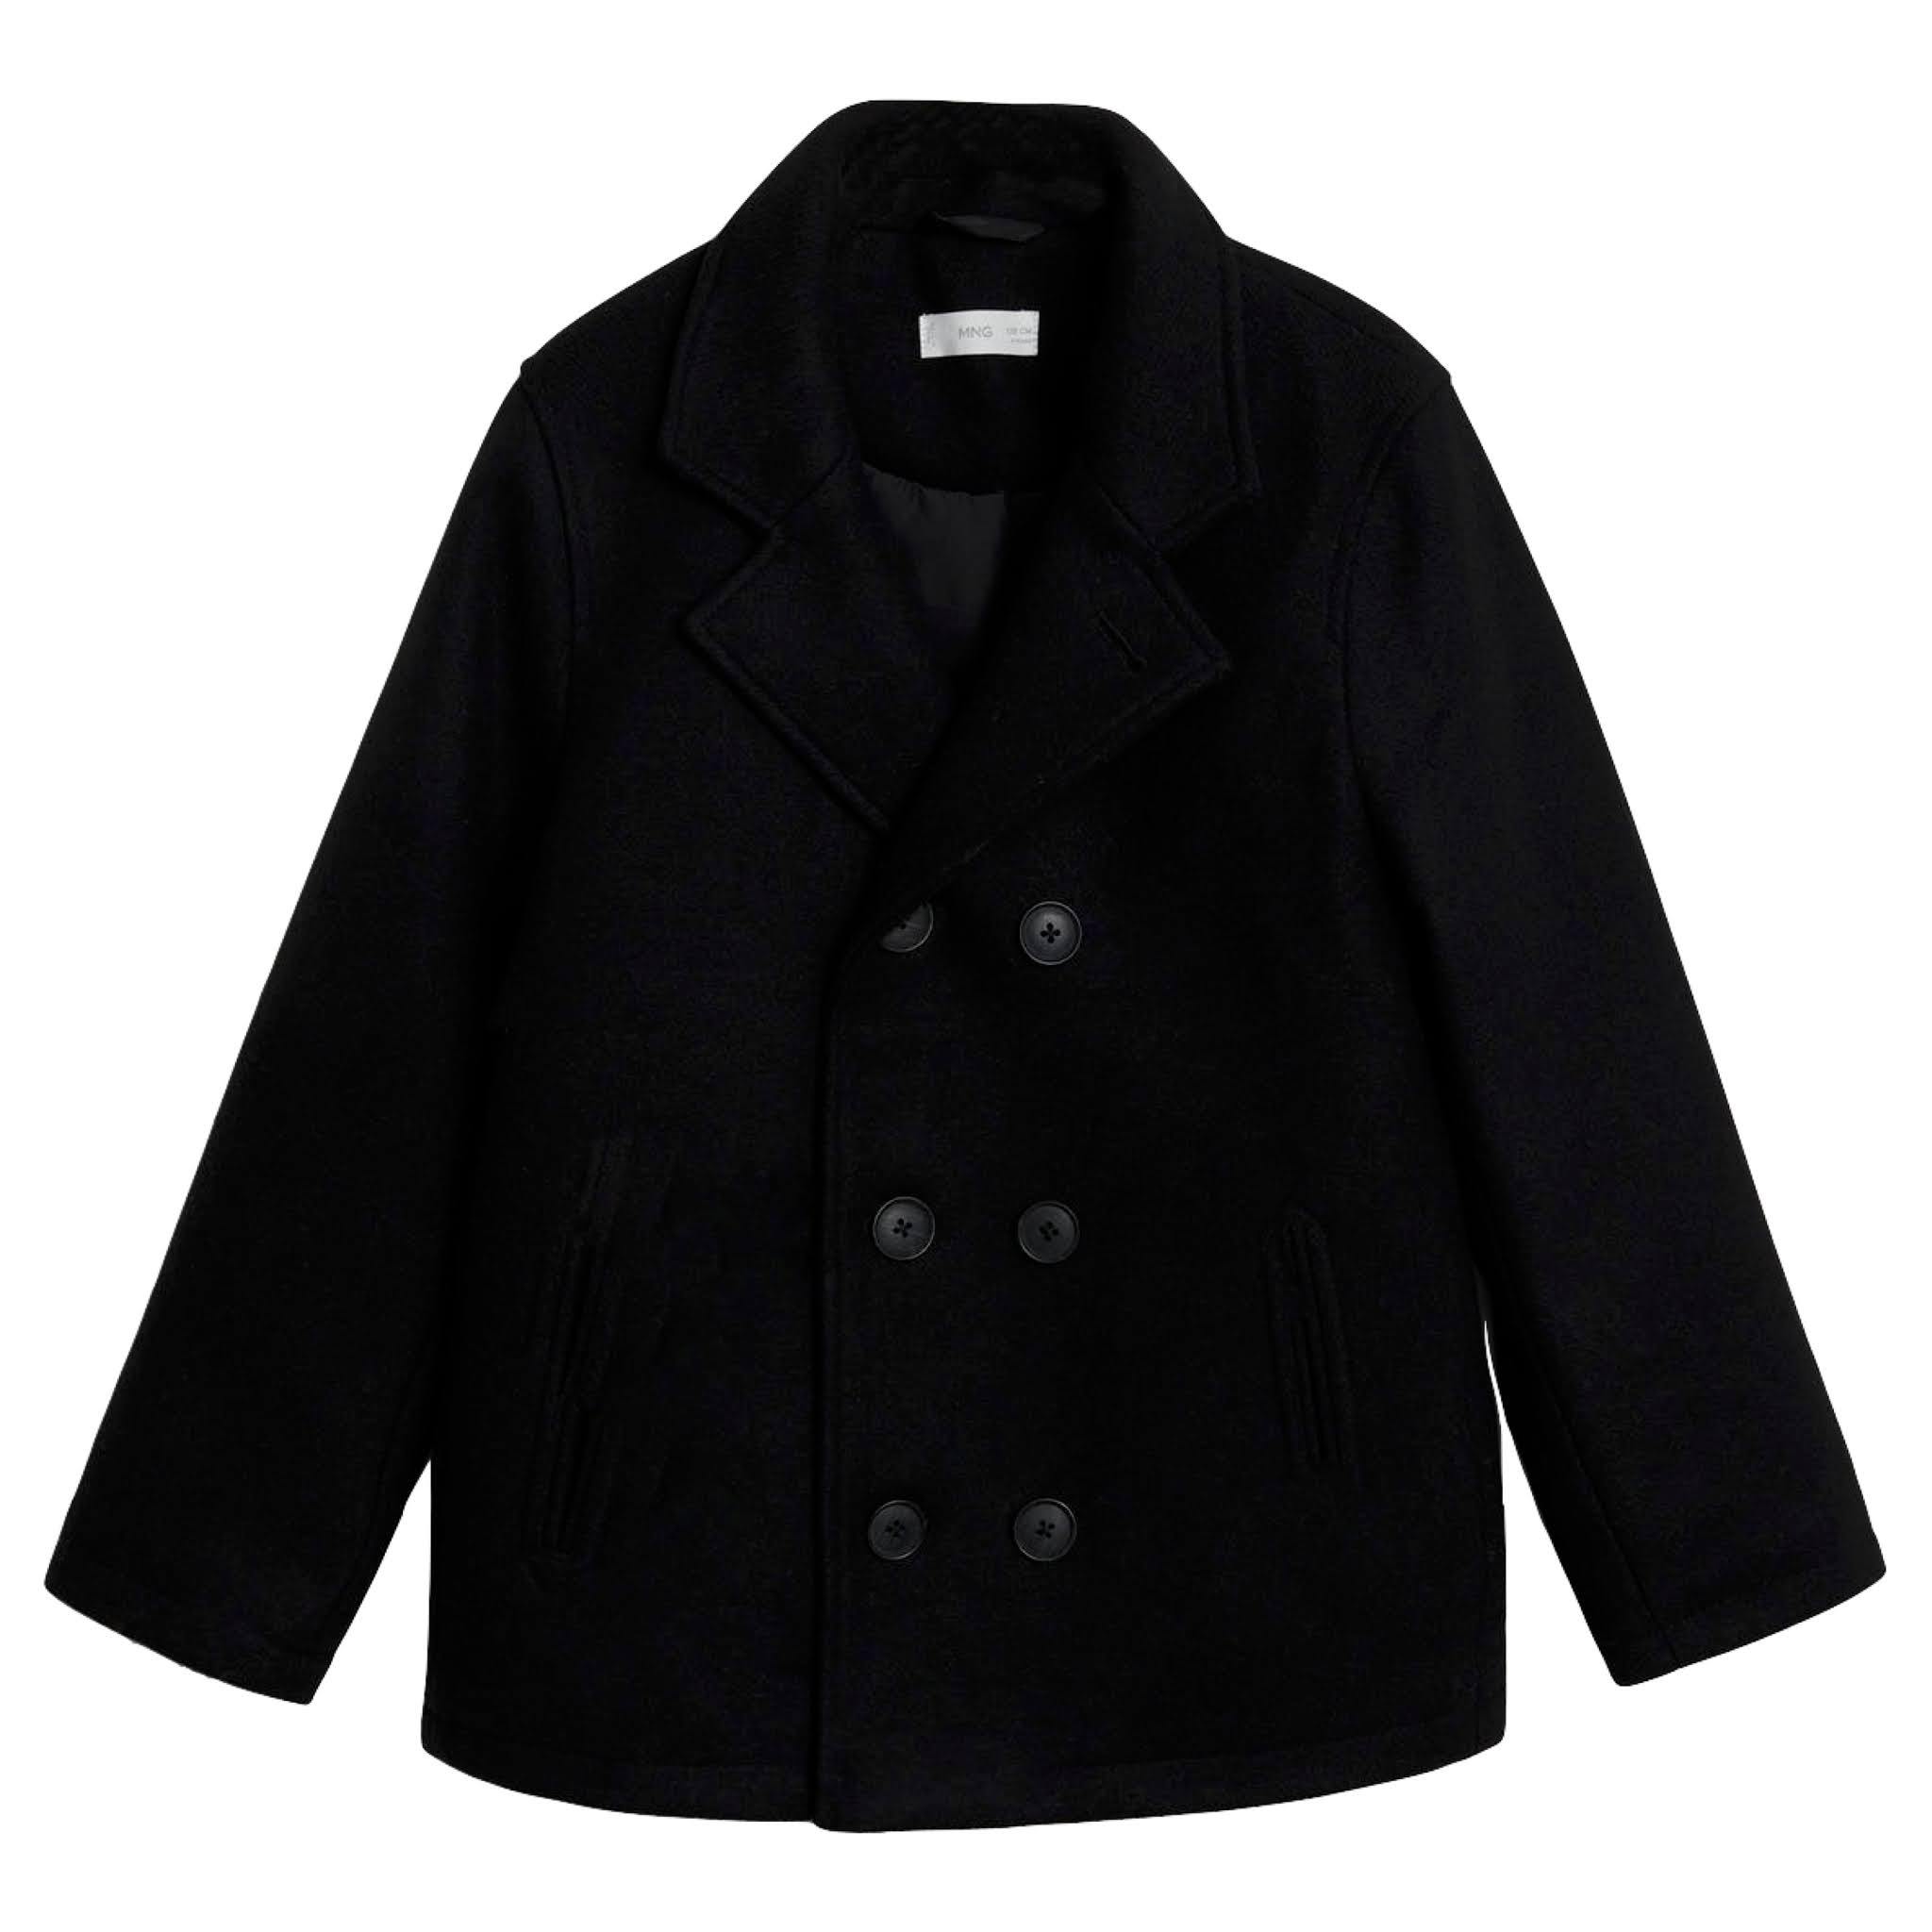 Boys Short Double Buttoned Coat from Mango Kids